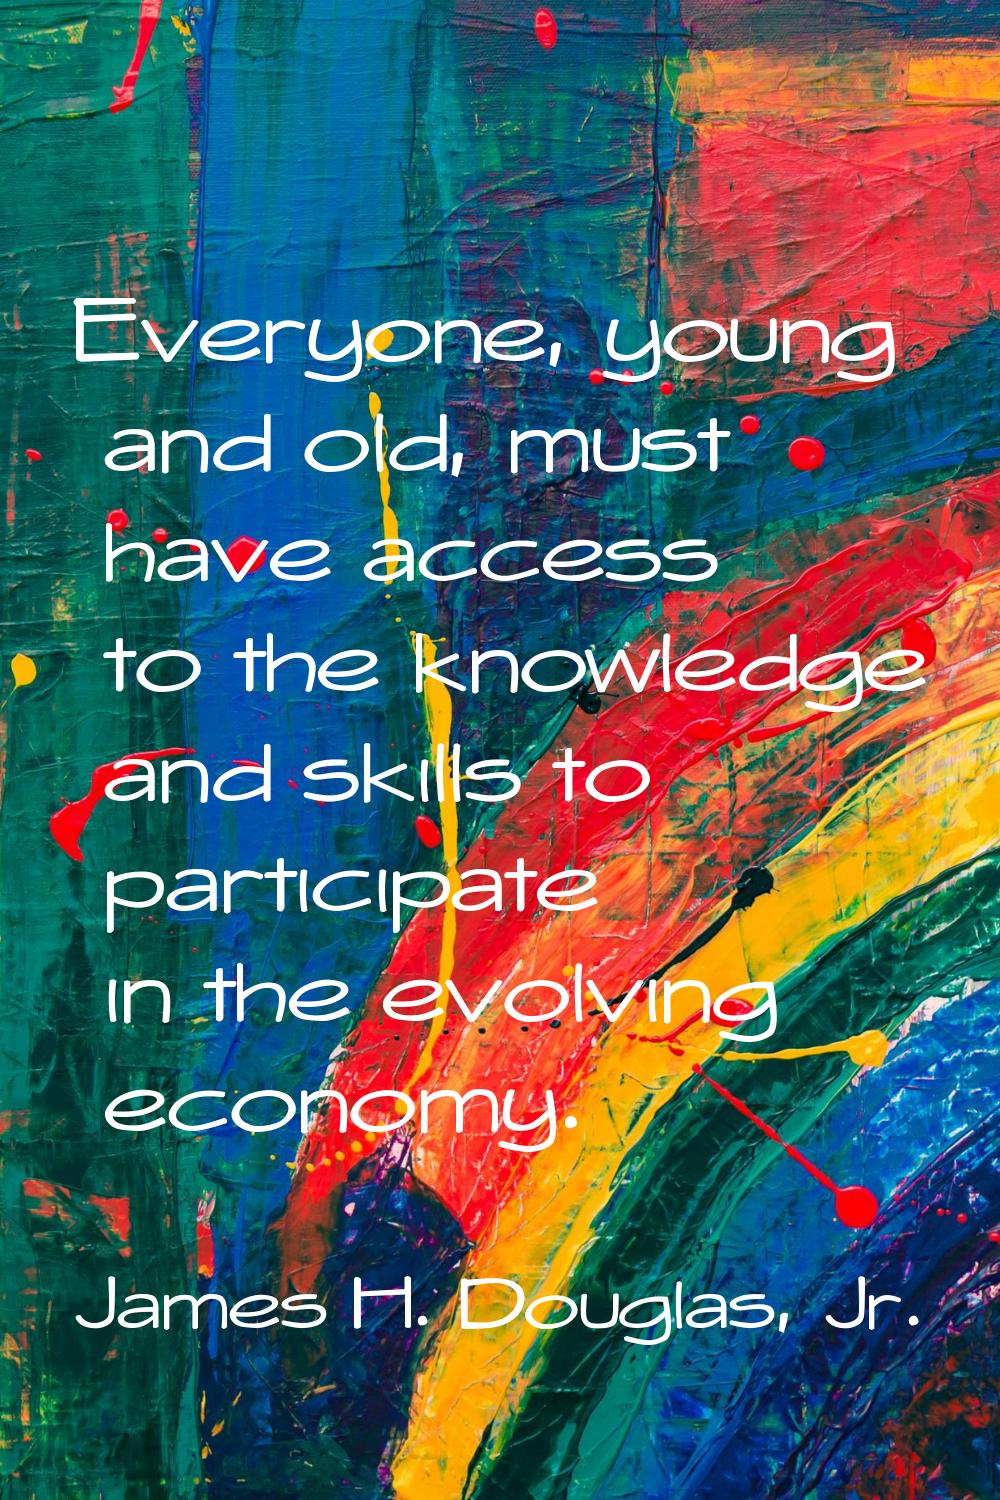 Everyone, young and old, must have access to the knowledge and skills to participate in the evolvin